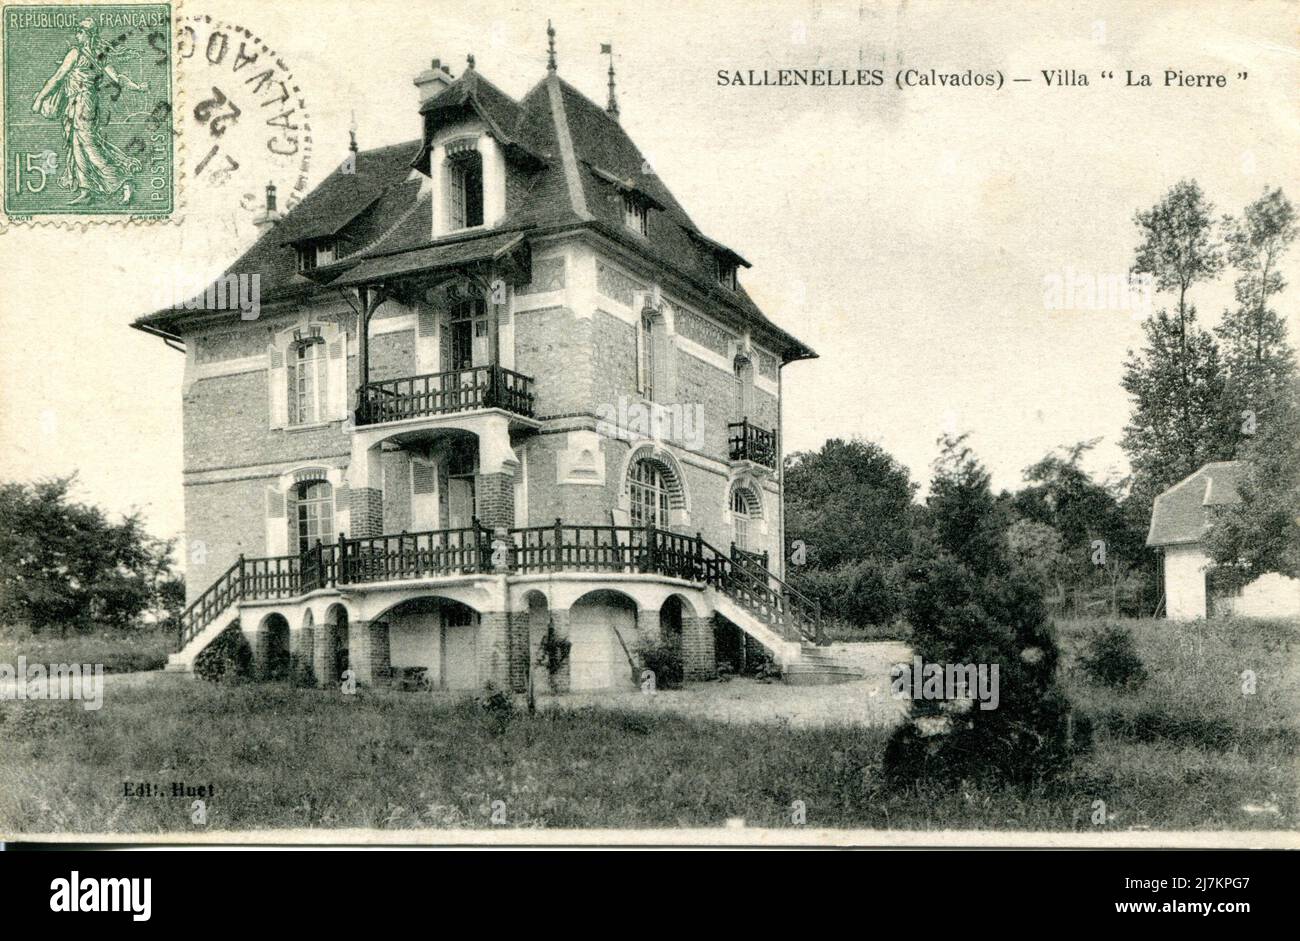 Sallenelles, "La Pierre" villa Department: 14 - Calvados  Region: Normandy (formerly Lower Normandy) Vintage postcard, late 19th - early 20th century Stock Photo